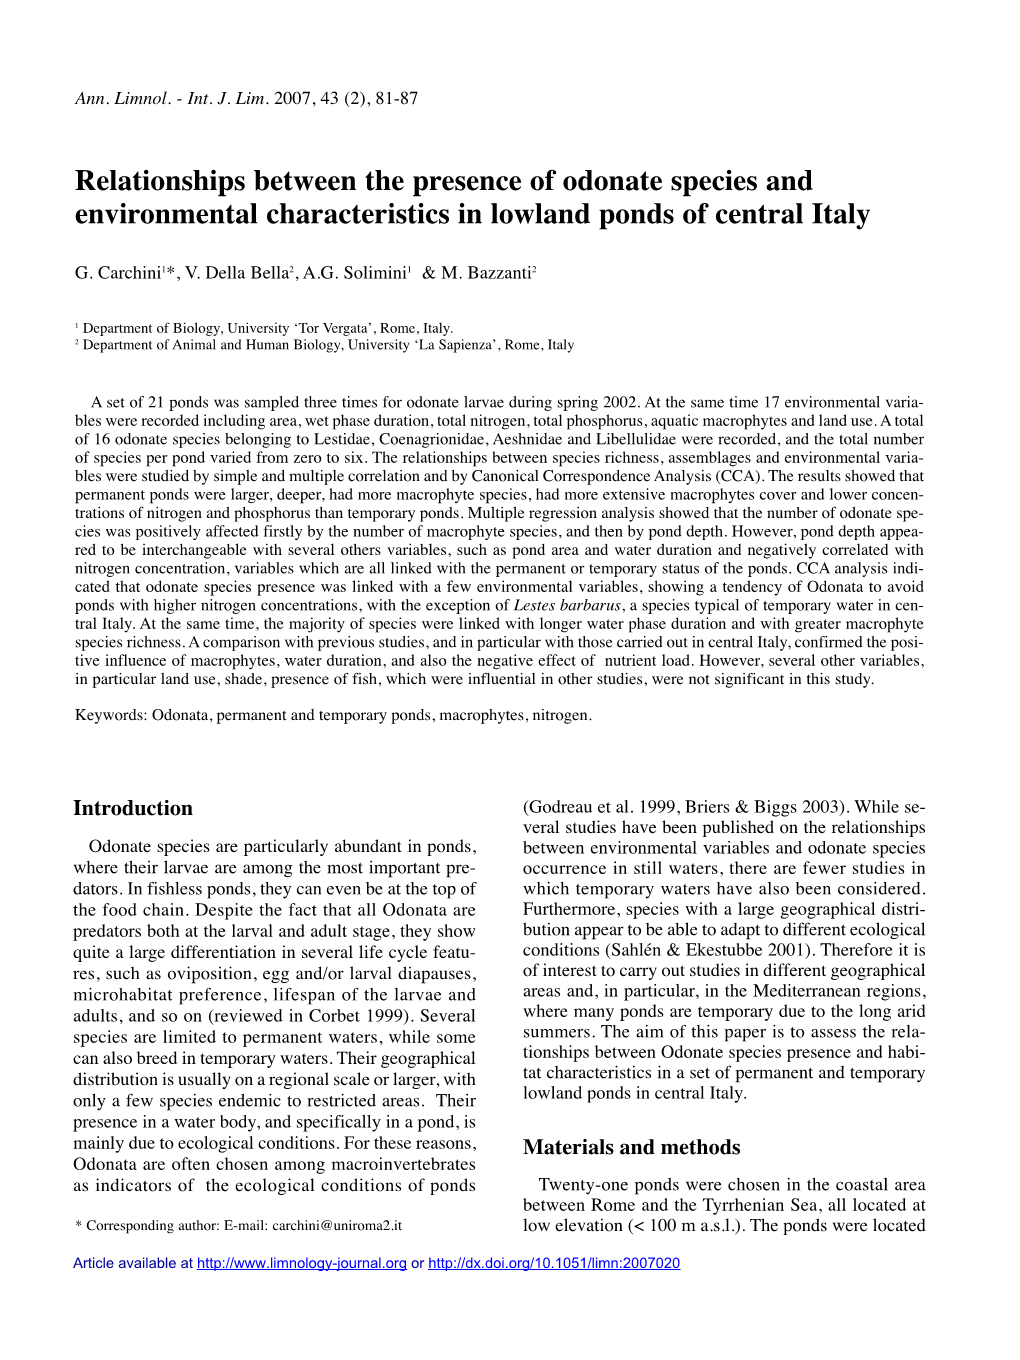 Relationships Between the Presence of Odonate Species and Environmental Characteristics in Lowland Ponds of Central Italy